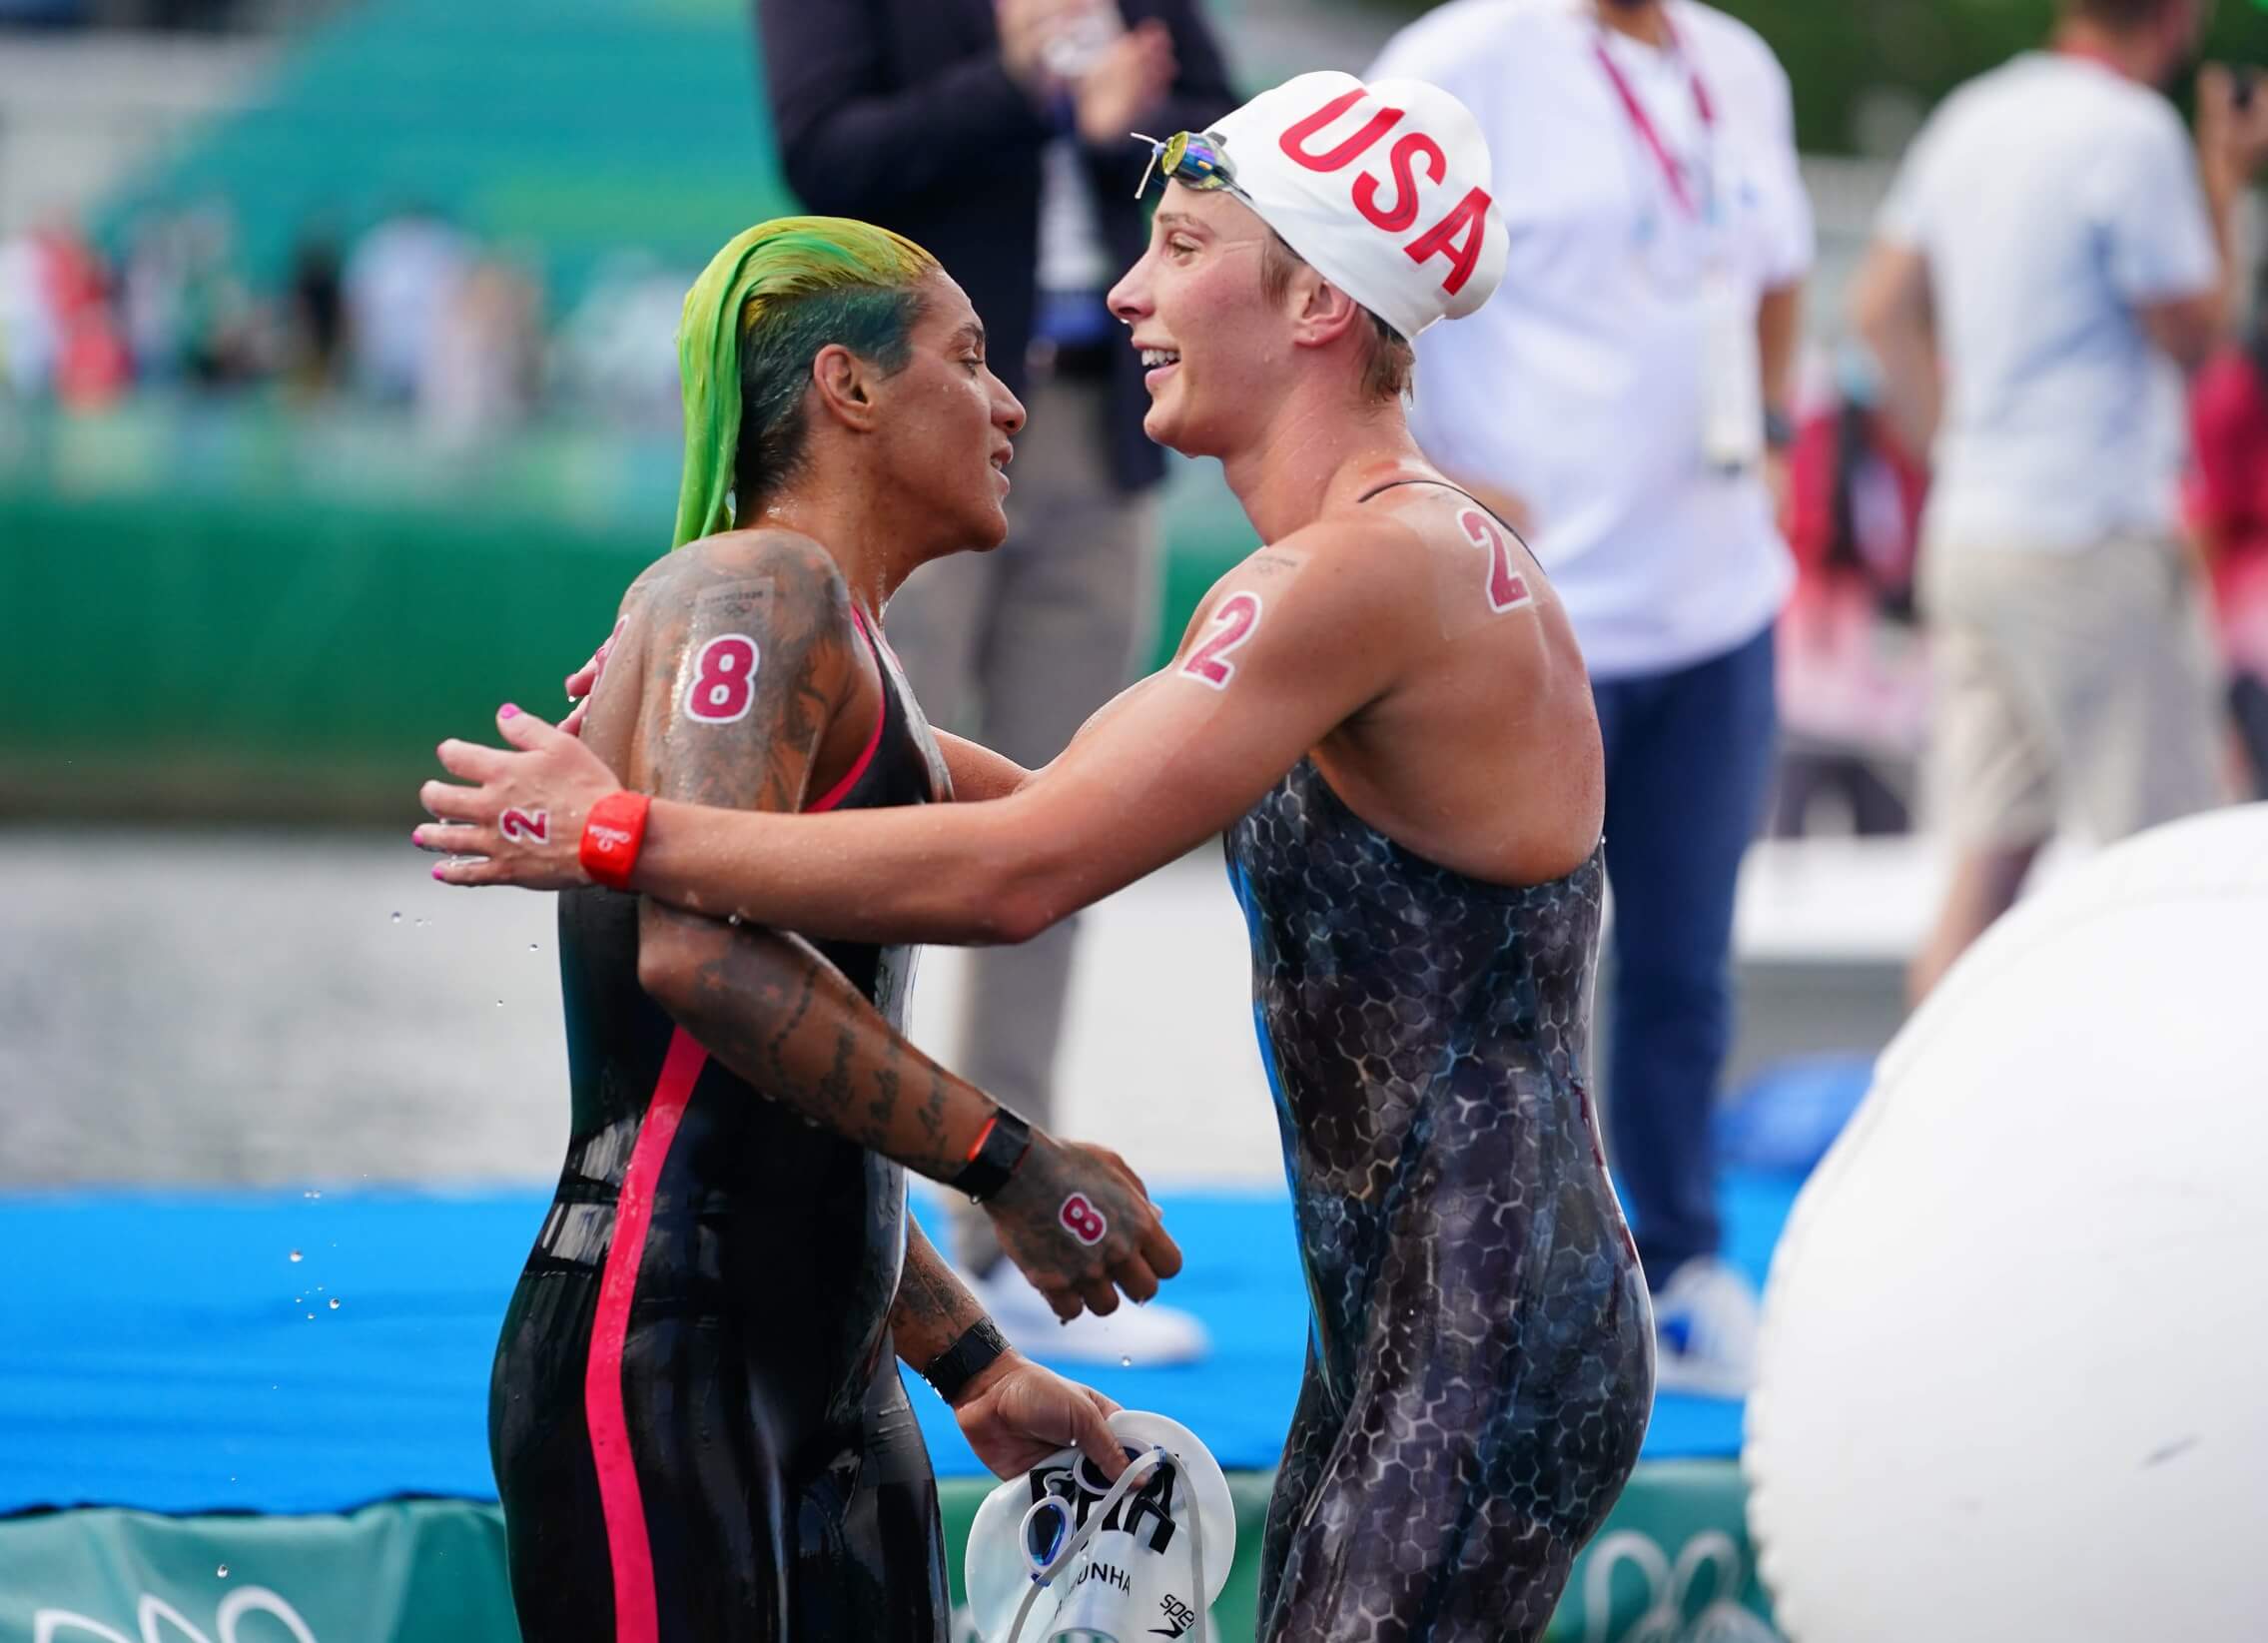 Aug 4, 2021; Tokyo, Japan; Gold medalist Ana Marcela Cunha (BRA) reacts with Ashley Twichell (USA) after winning the women's 10km open water swimming competition during the Tokyo 2020 Olympic Summer Games at Odaiba Marine Park. Mandatory Credit: Kareem Elgazzar-USA TODAY Sports